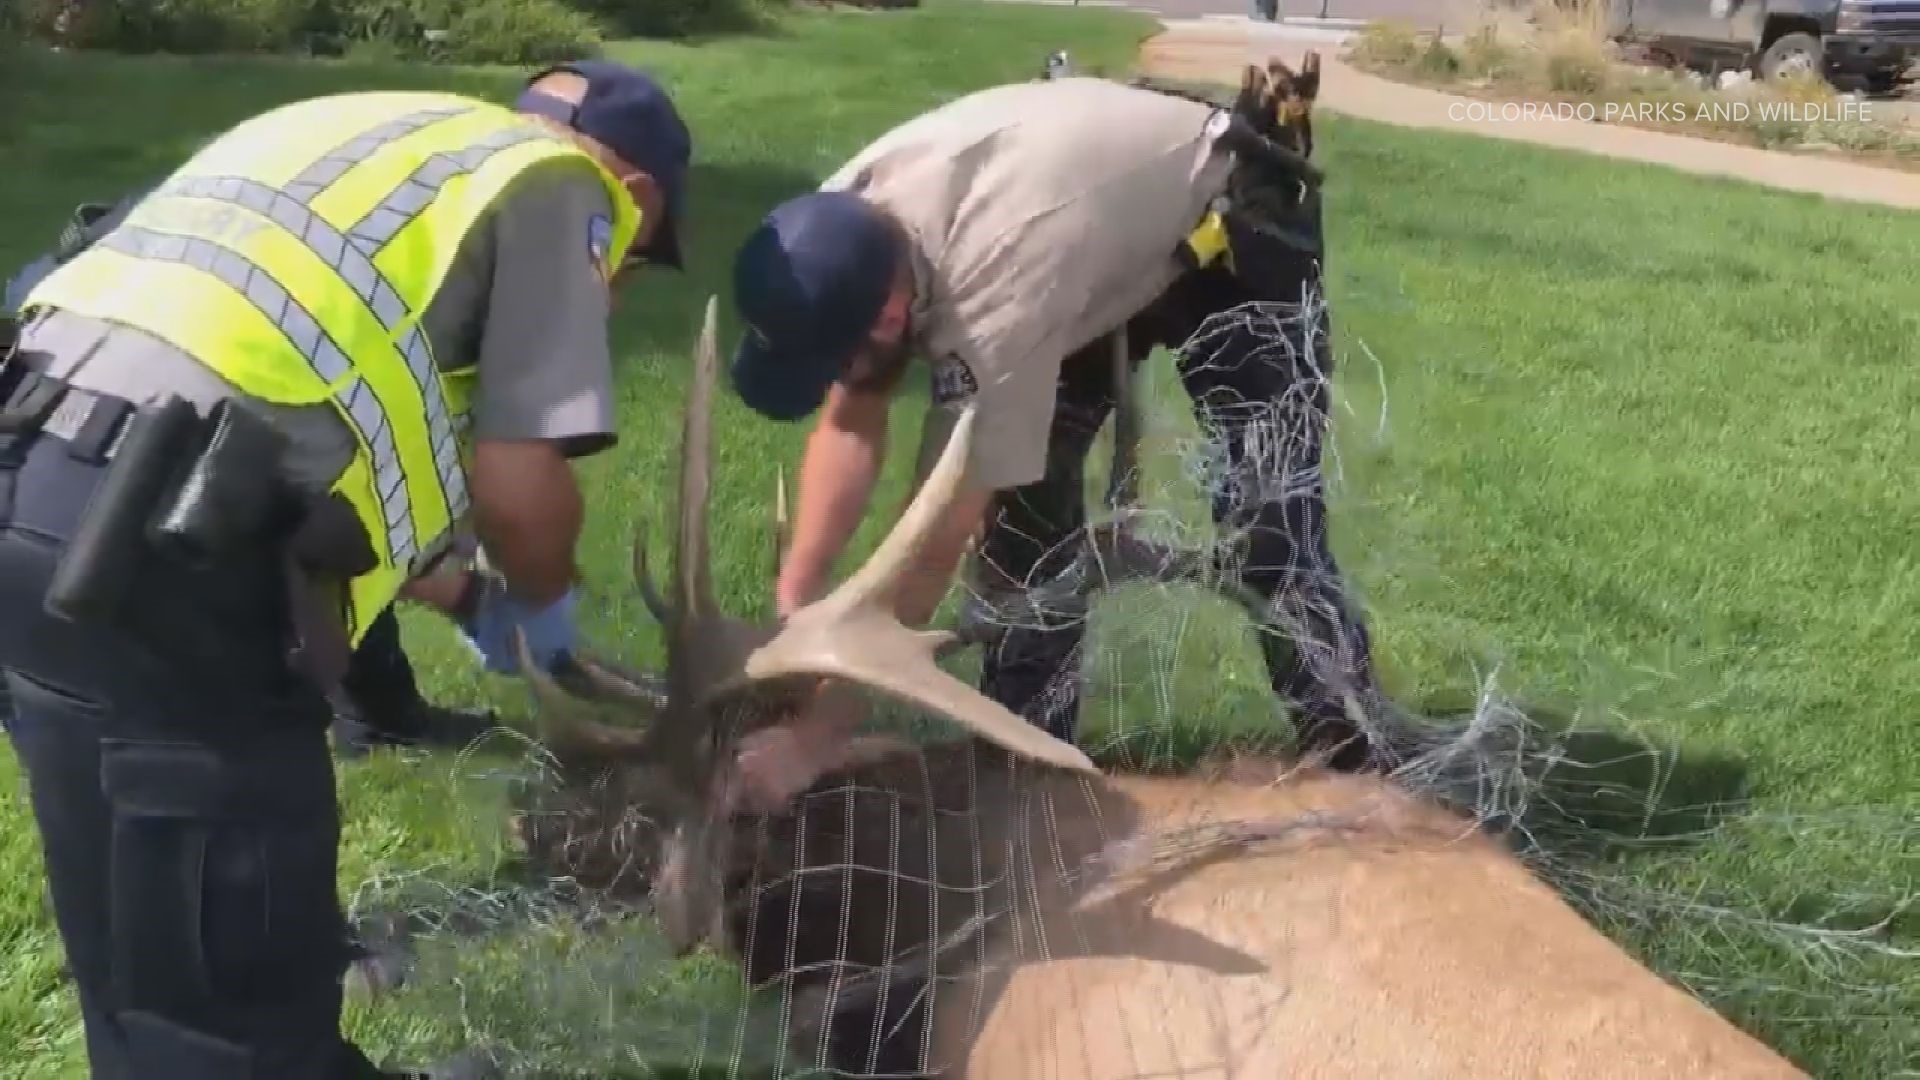 Colorado Parks and Wildlife officers removed about 30 feet of fencing that was tangled around the antlers of a bull elk in Estes Park Tuesday.